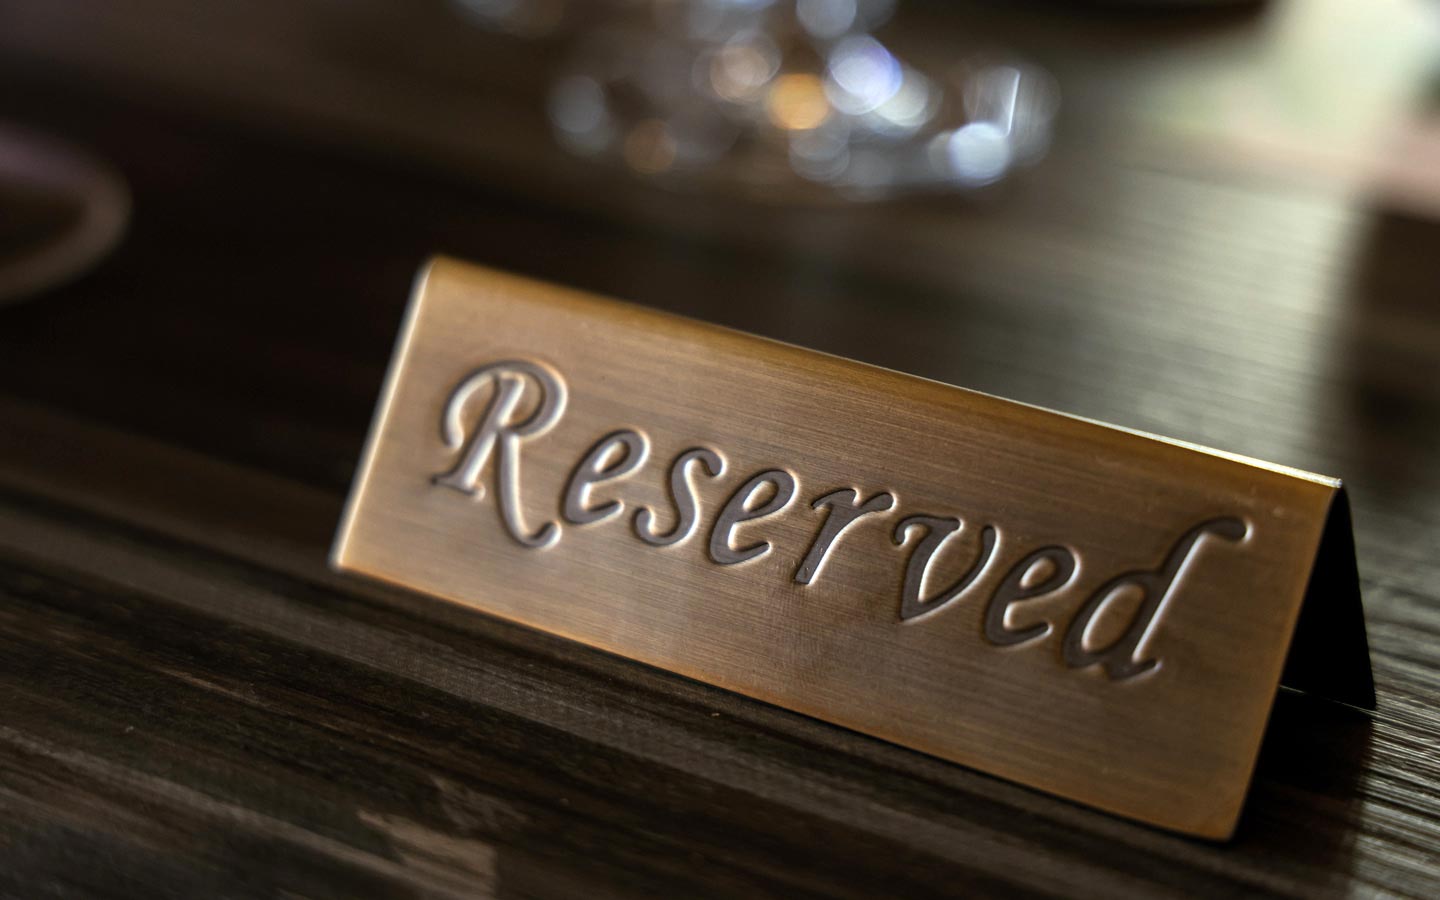 Bottle Bank - Membership - Reserved Sign Securing a Table for Members